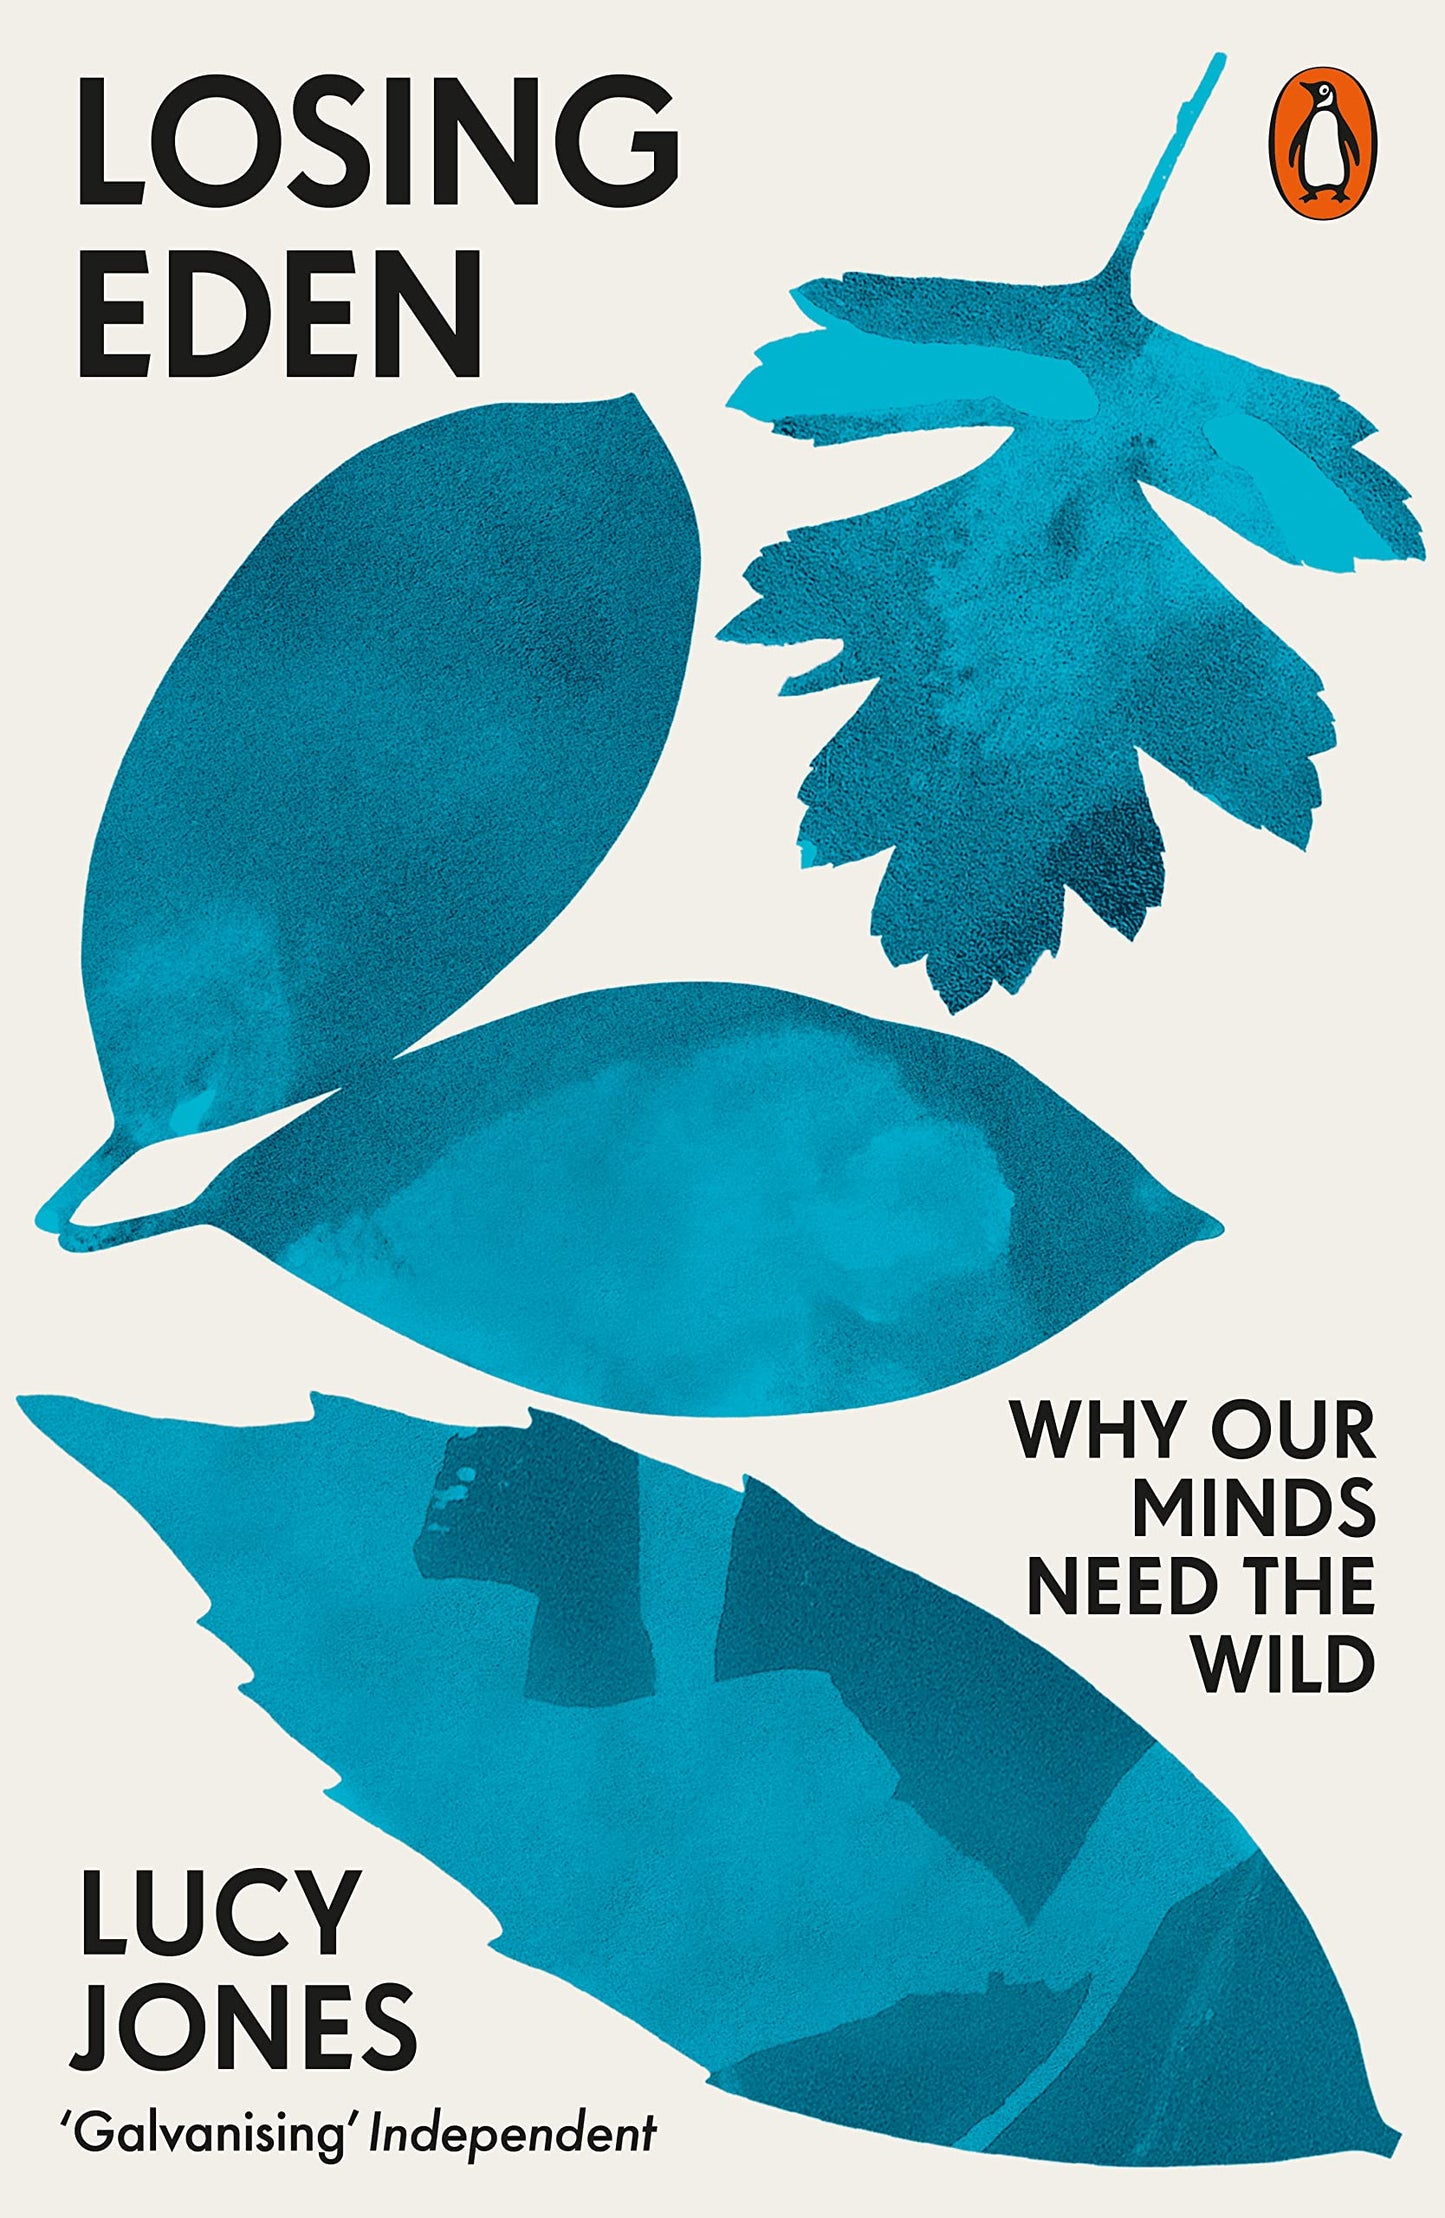 Losing Eden: Why Our Minds Need the Wild by Lucy Jones